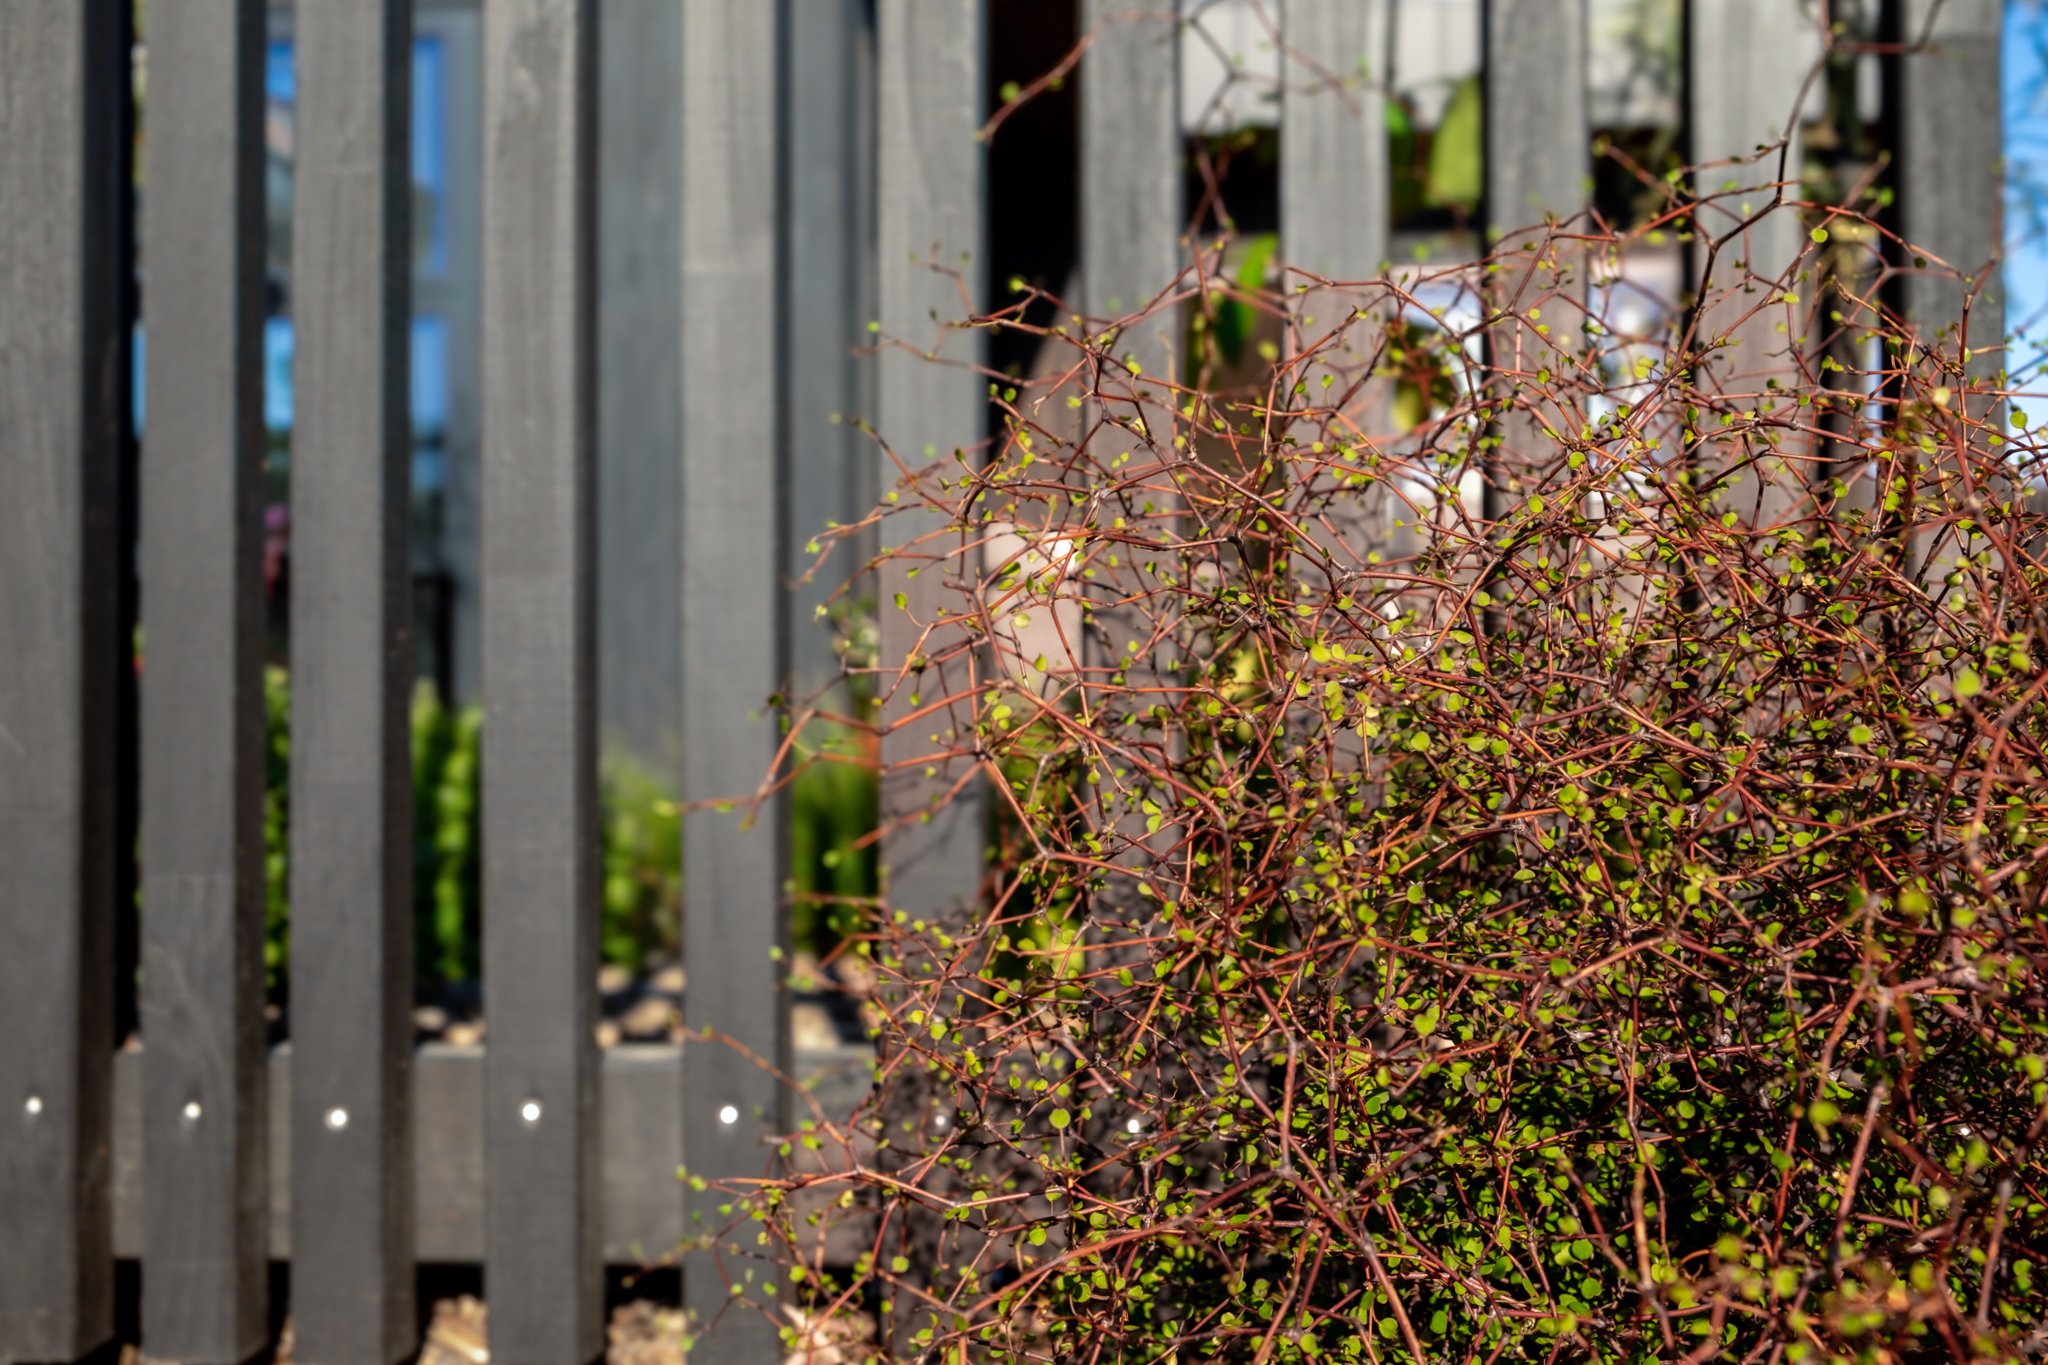 Muehlenbeckia, a favourite shrub of ours that creates interesting structure and texture in a garden. With a black timber screen, Muehelenbeckia will create privacy and contrast. 🌿

#newvisionlandscapes #nvl #nvp #nvpools #landscapearchitecture #land